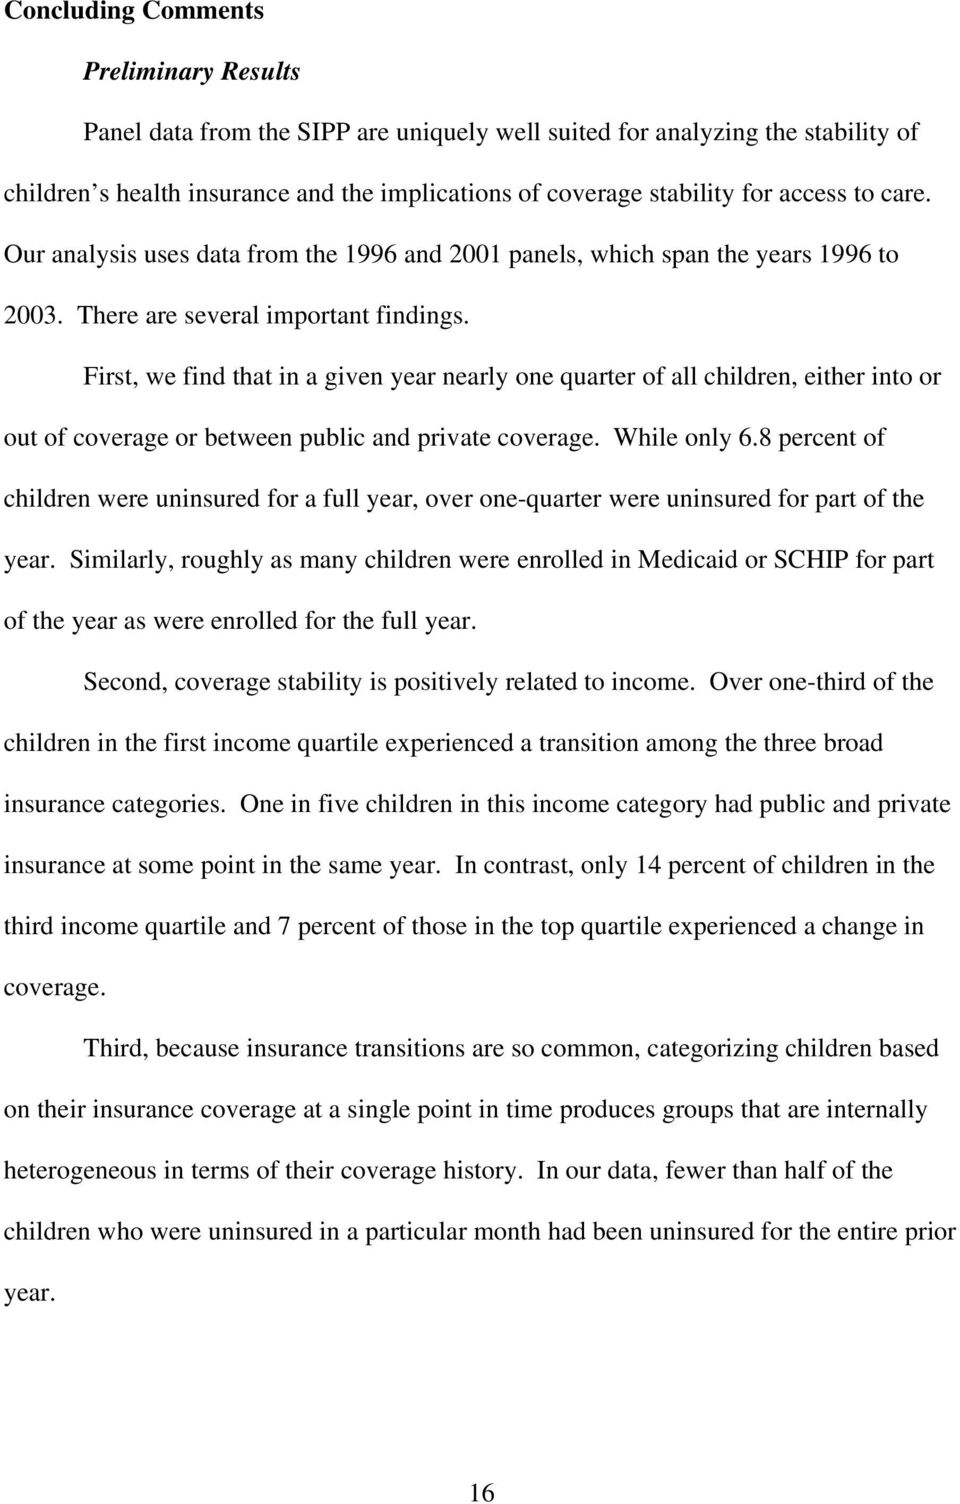 First, we find that in a given year nearly one quarter of all children, either into or out of coverage or between public and private coverage. While only 6.